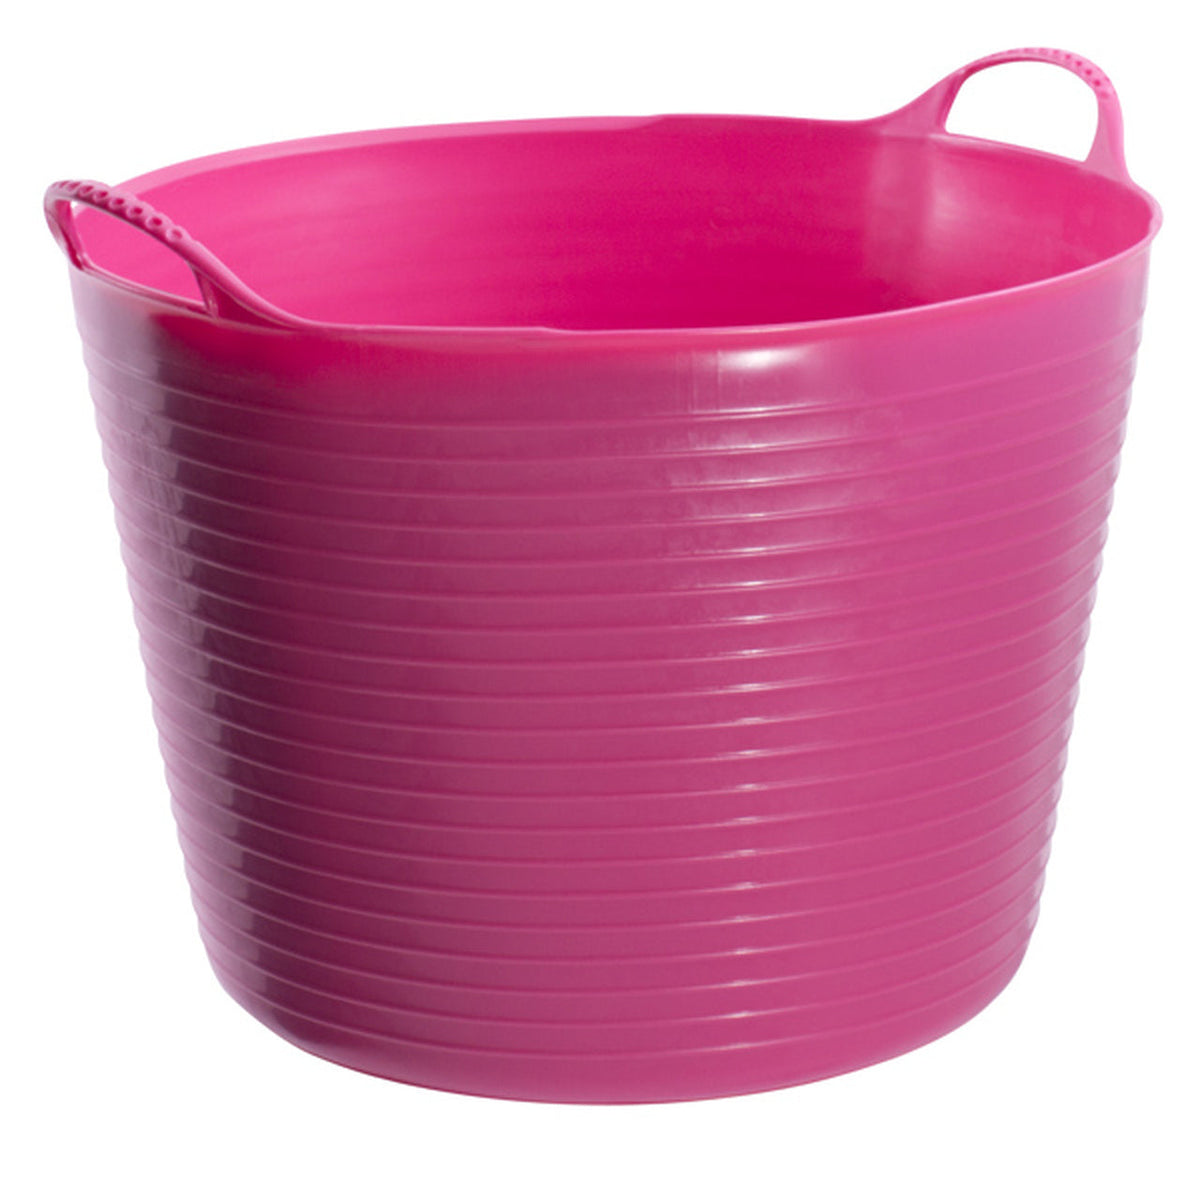 Large pink bucket with measurements on inside and two curved handles.